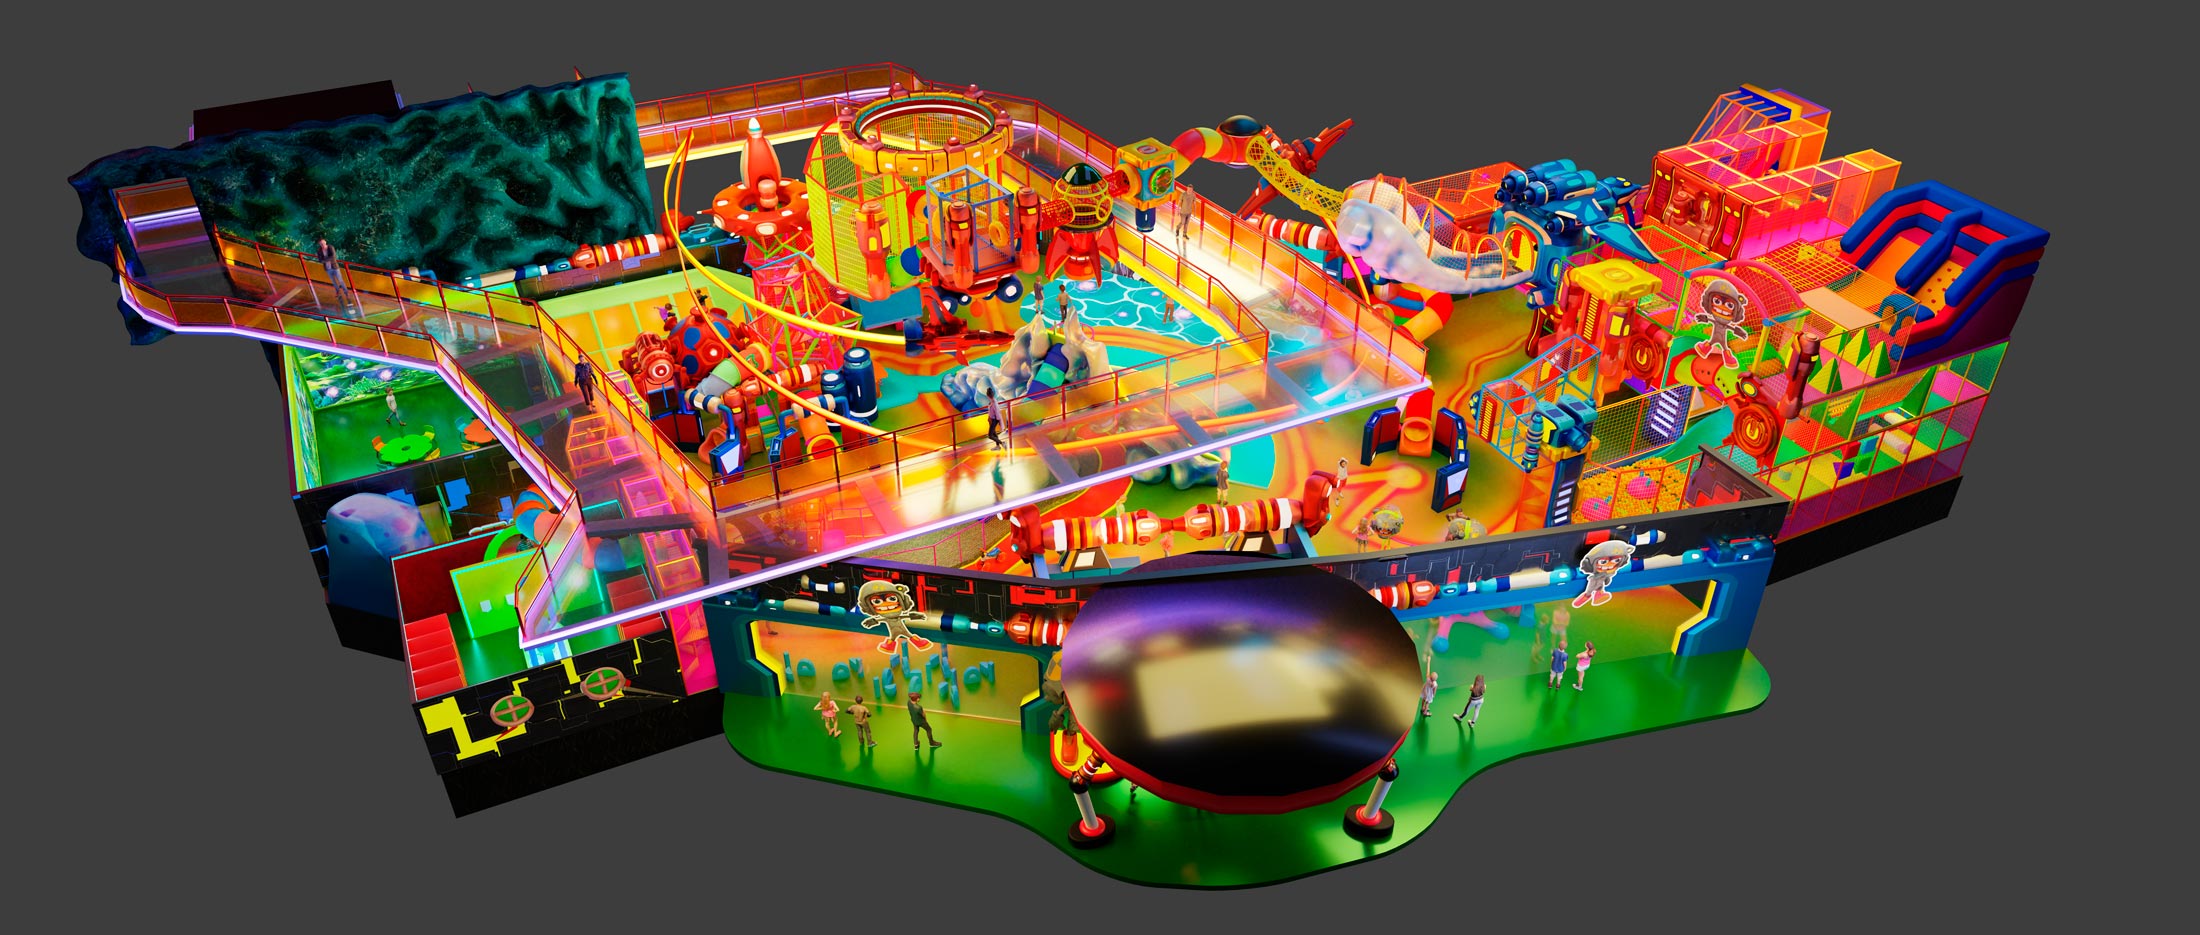 INDOOR THEME PARK DESIGN AND CONSTRUCTION